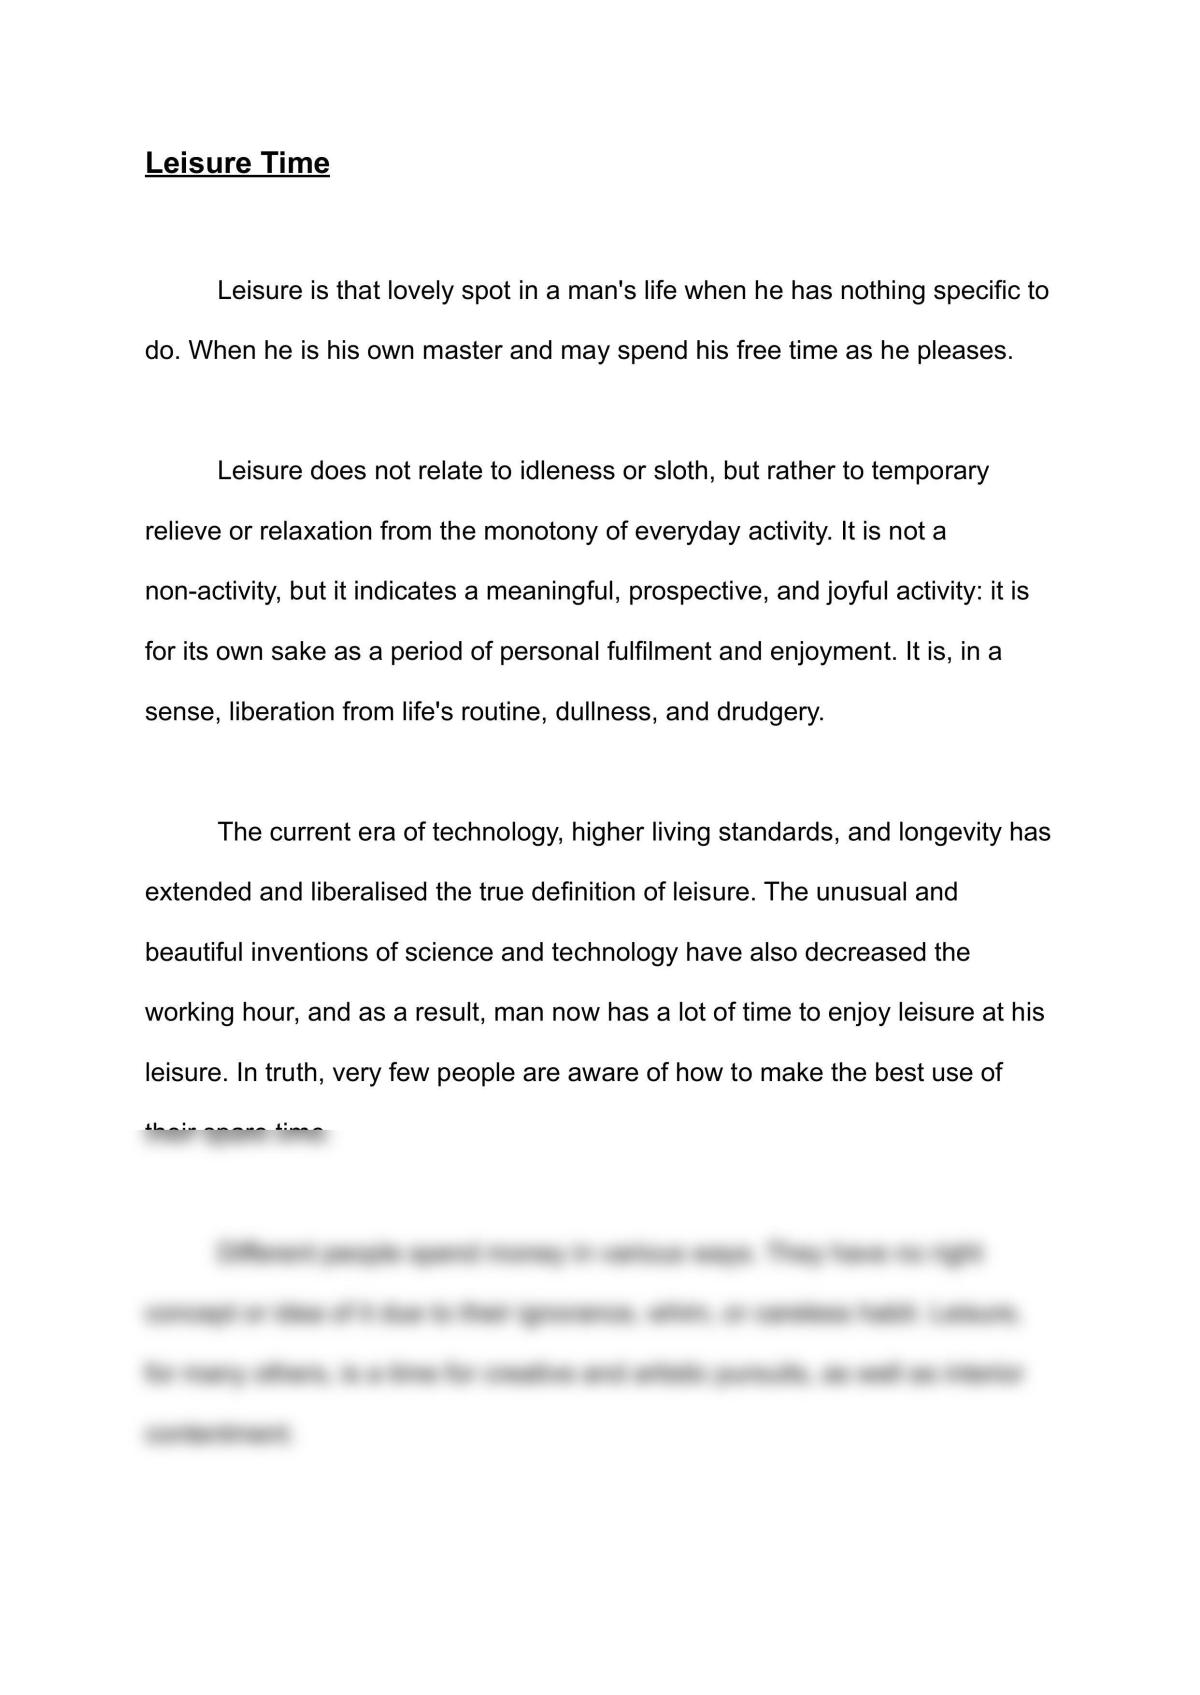 example essay about leisure time